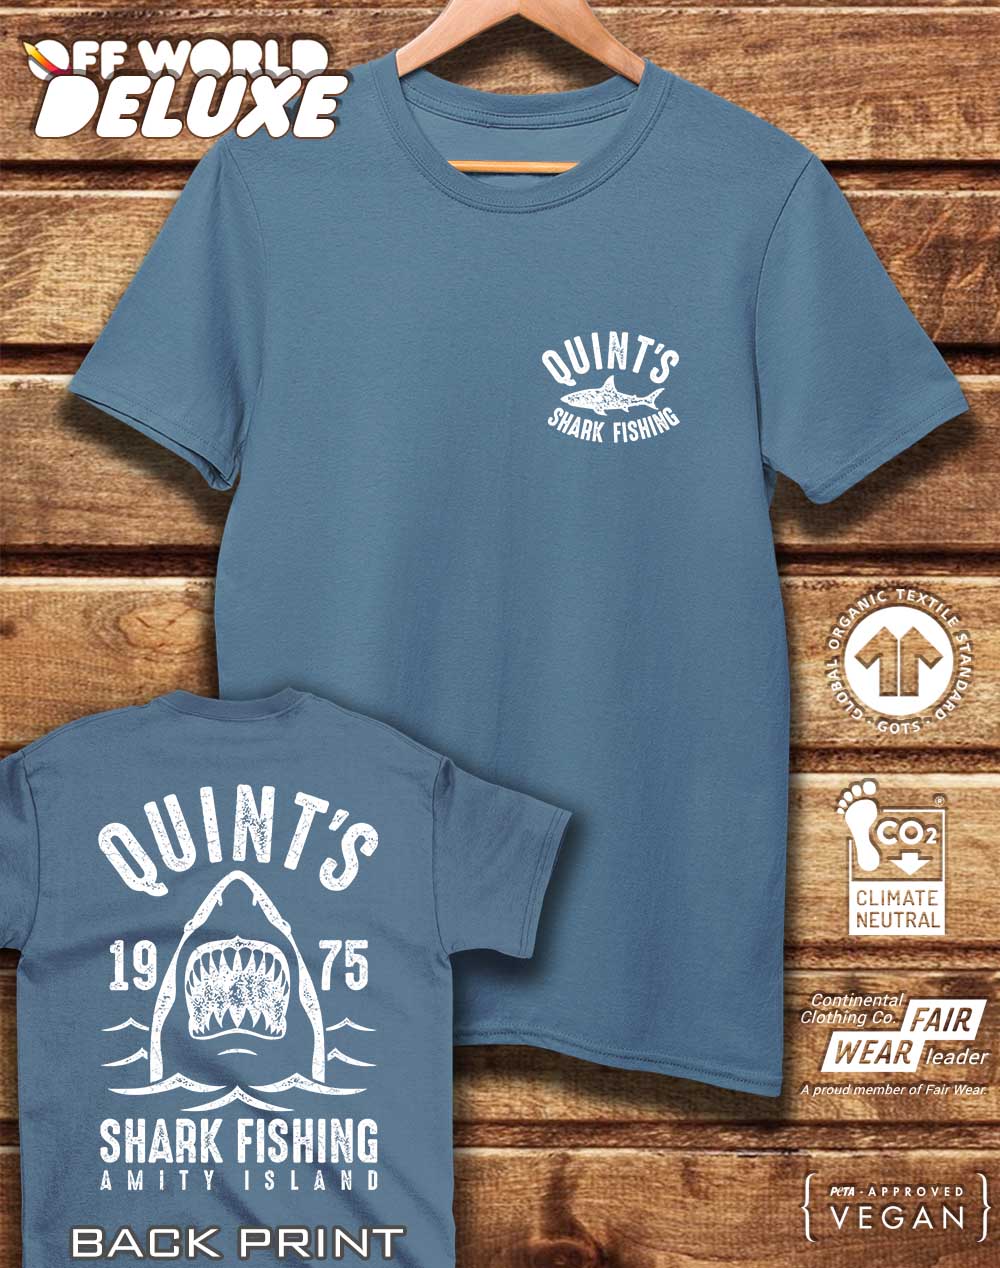 DELUXE Quint's Shark Fishing with Back Print Organic Cotton T-Shirt | Off  World Tees